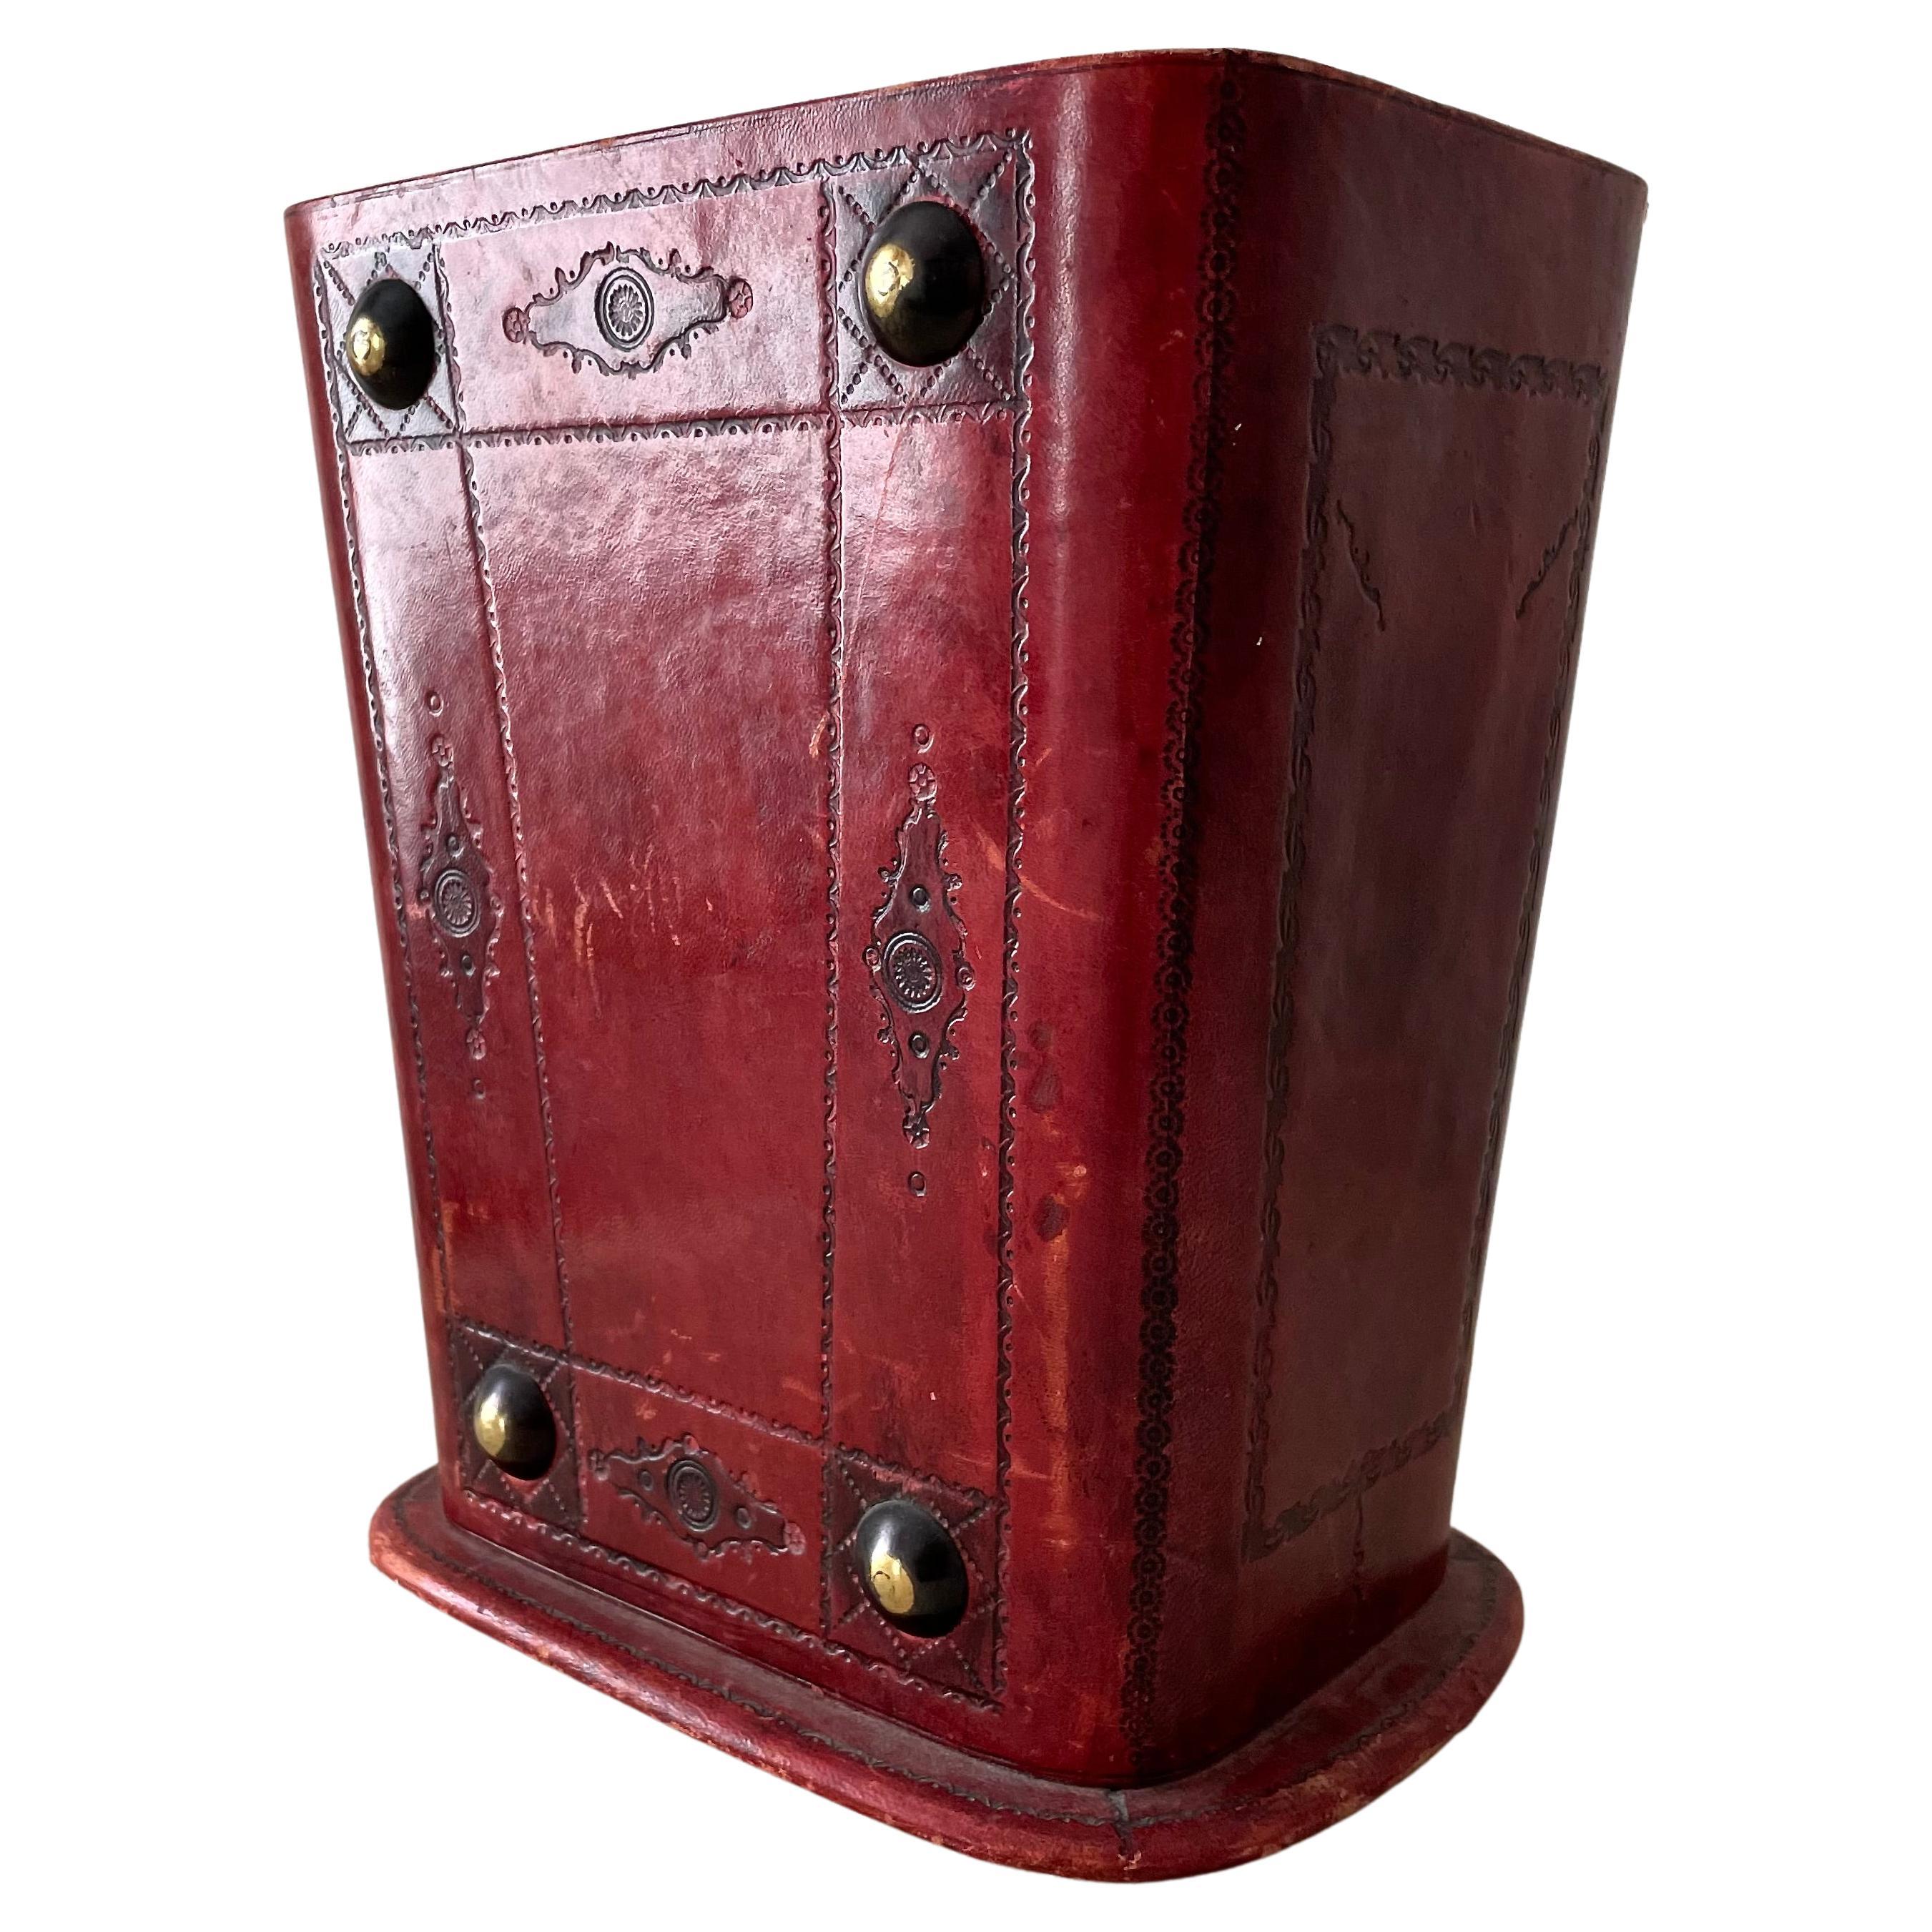 Red leather waster basket or trash can - for wastepaper or creative use. Lined in a brown velvet on inside and base. Features patinated brass decorative domes in each corner. Adds character to any office. 

 Lined on the inside and bottom with